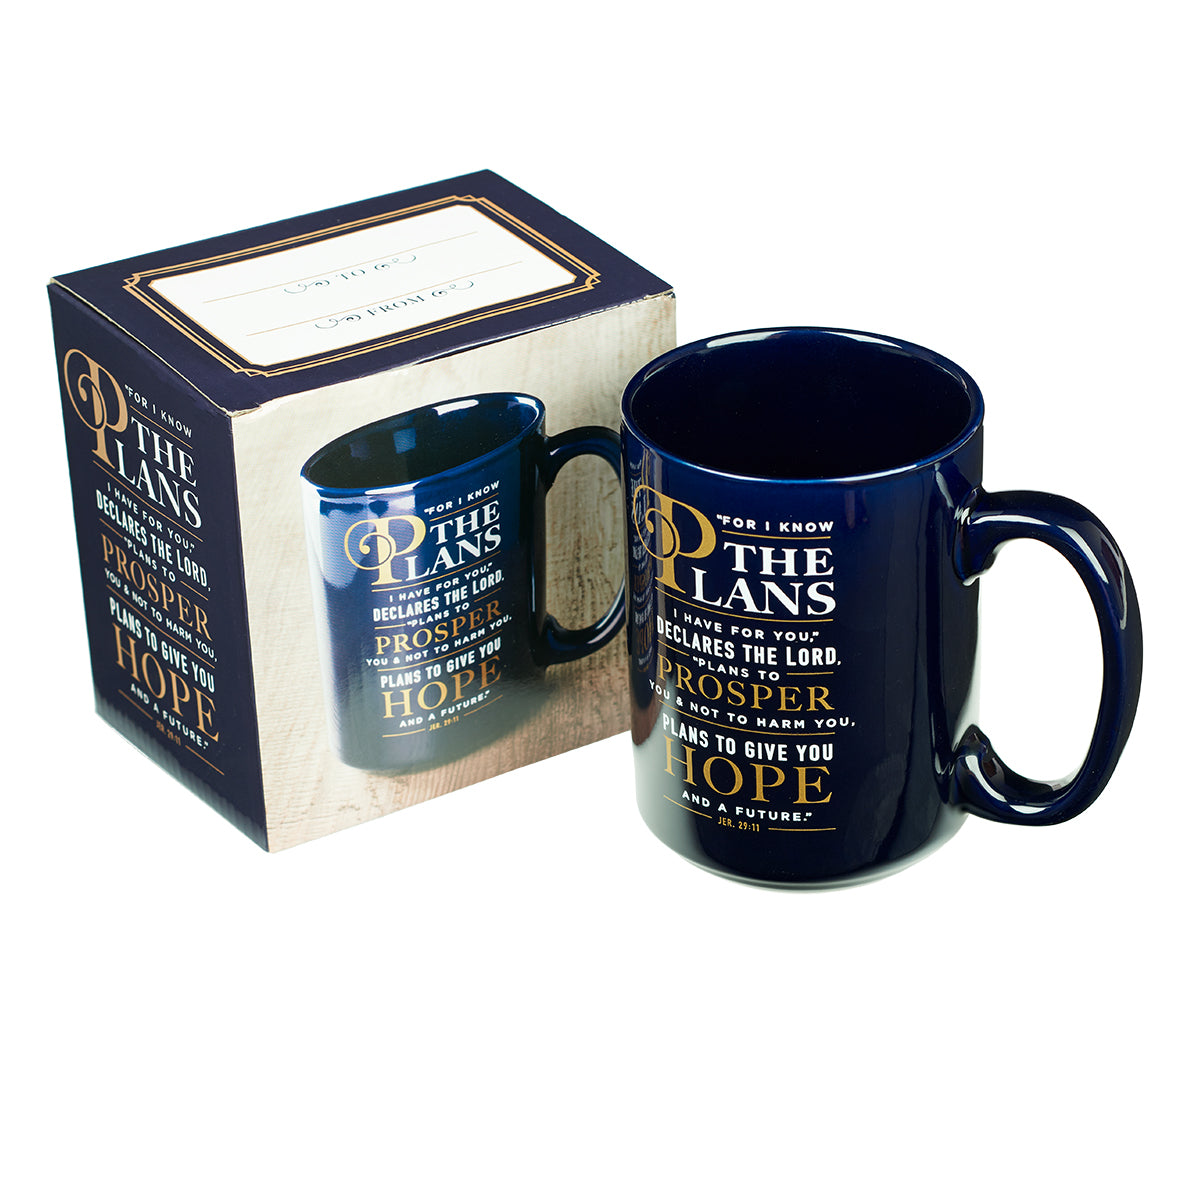 Image of For I Know the Plans Coffee Mug - Jeremiah 29:11 other